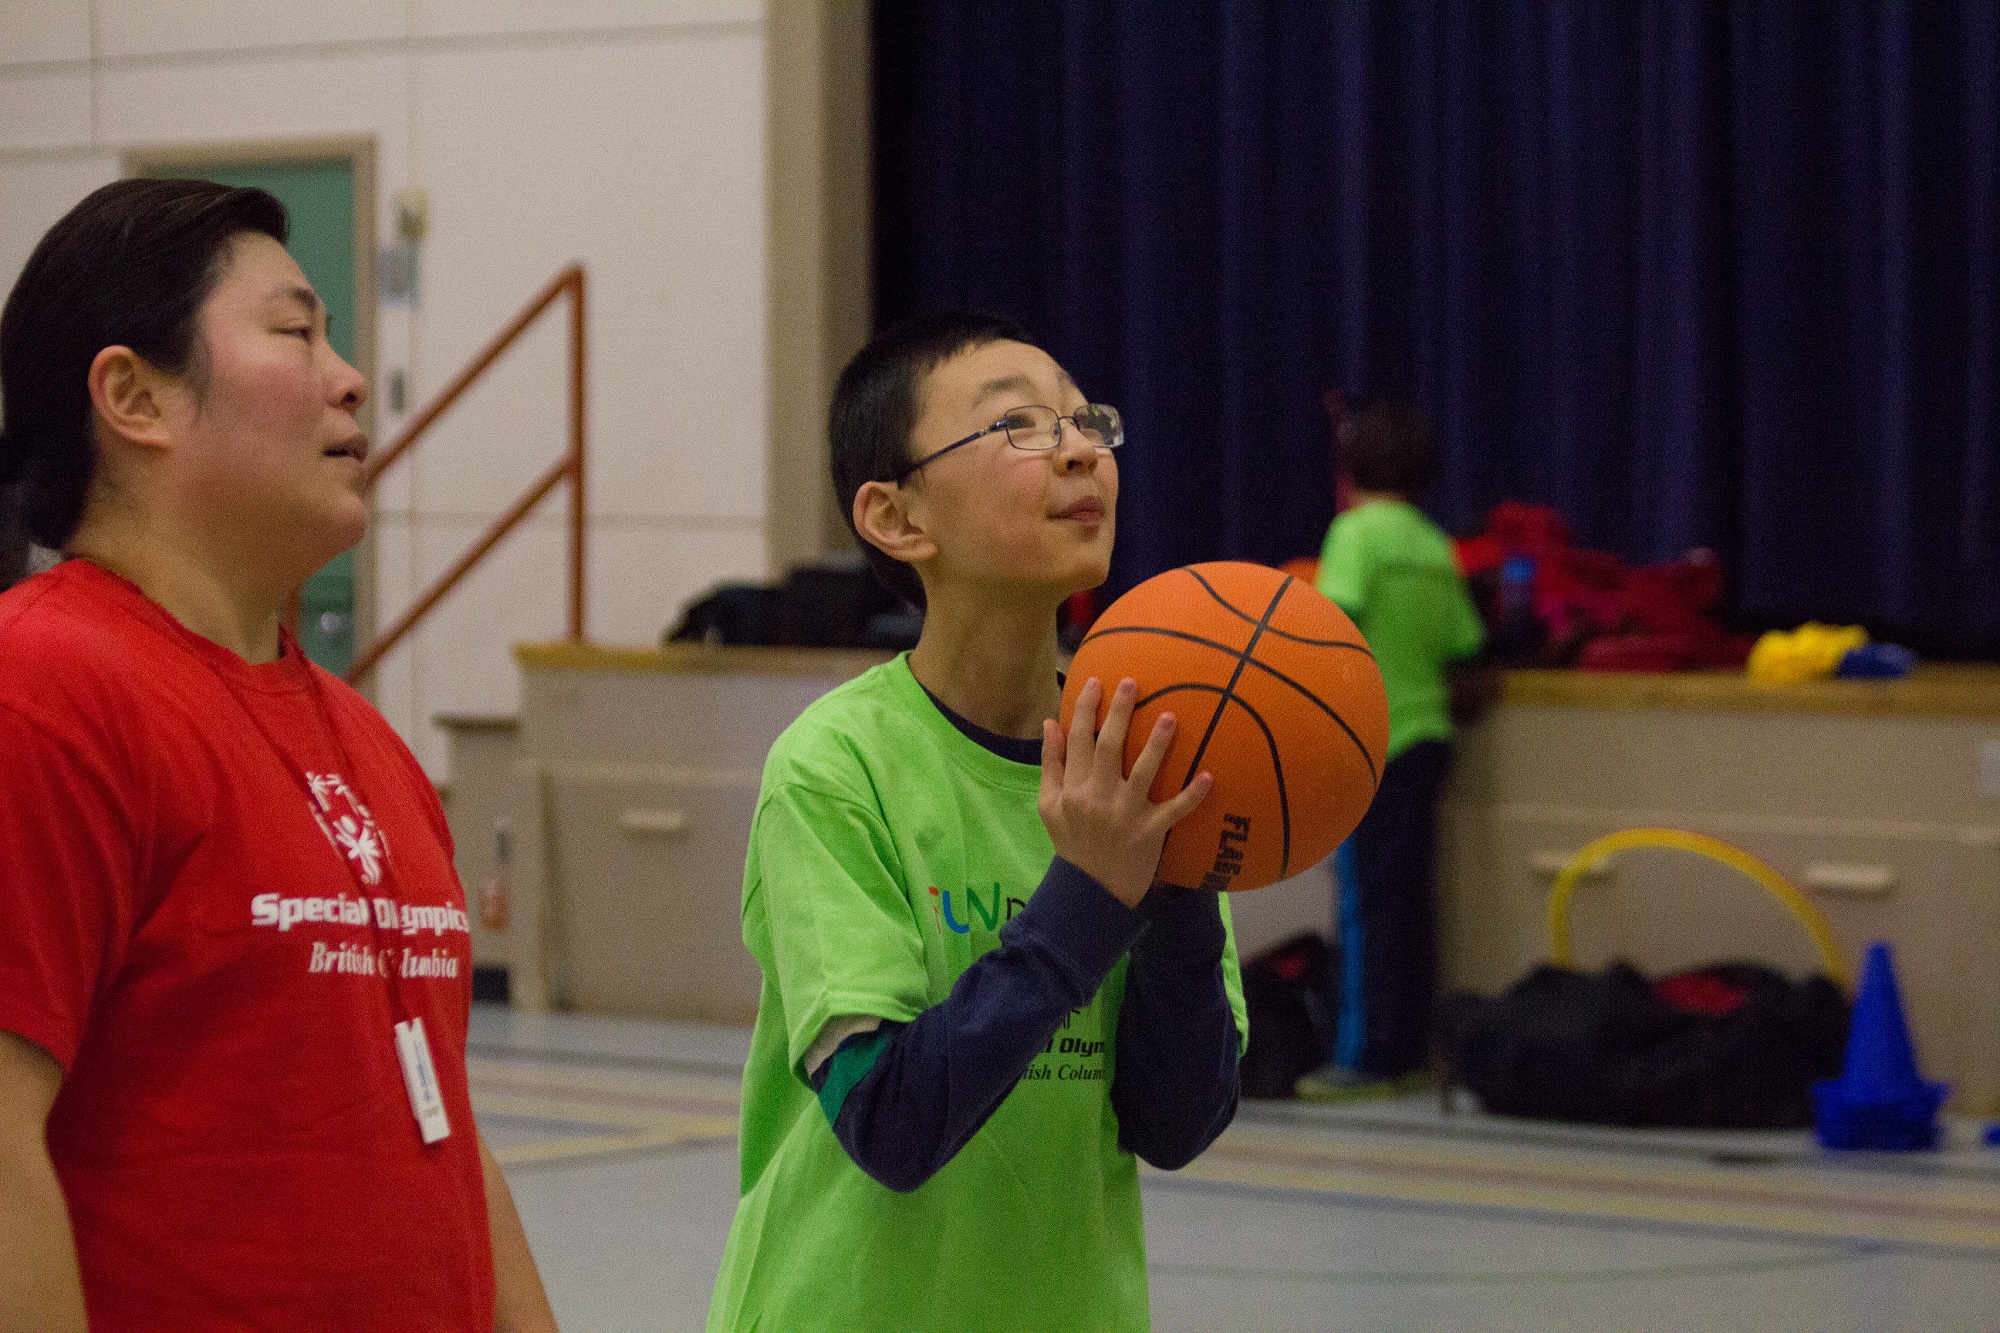 FUNdamentals is a continuation of the Active Start program for athletes with an intellectual disability ages 7-12